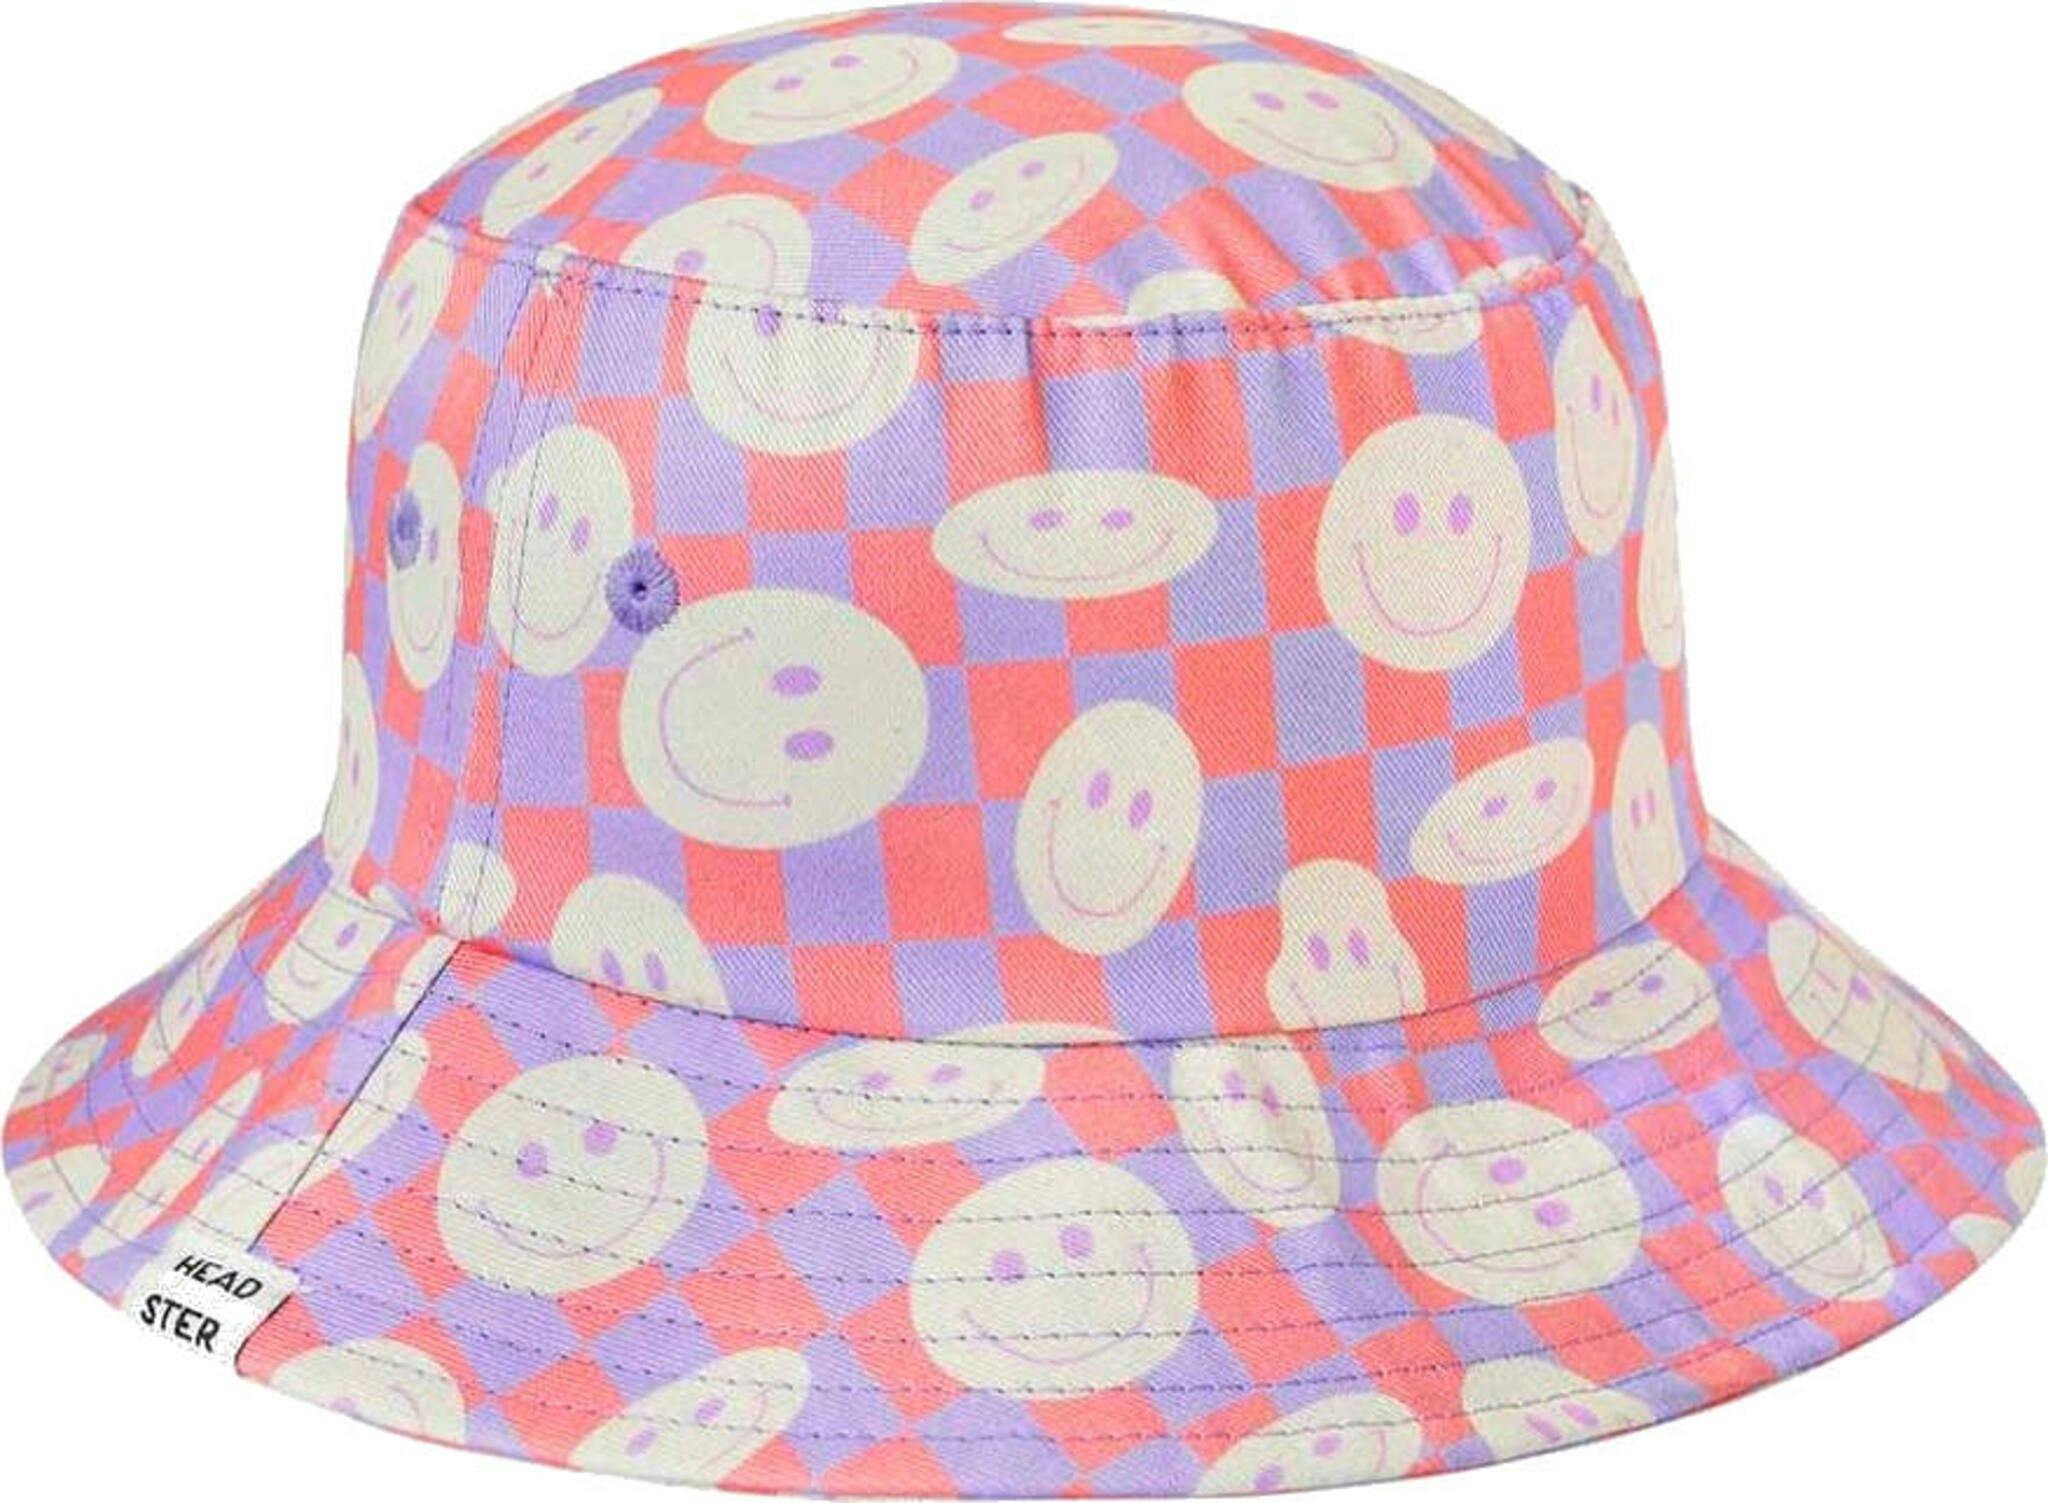 Product image for Smiley Bucket Hat - Kids